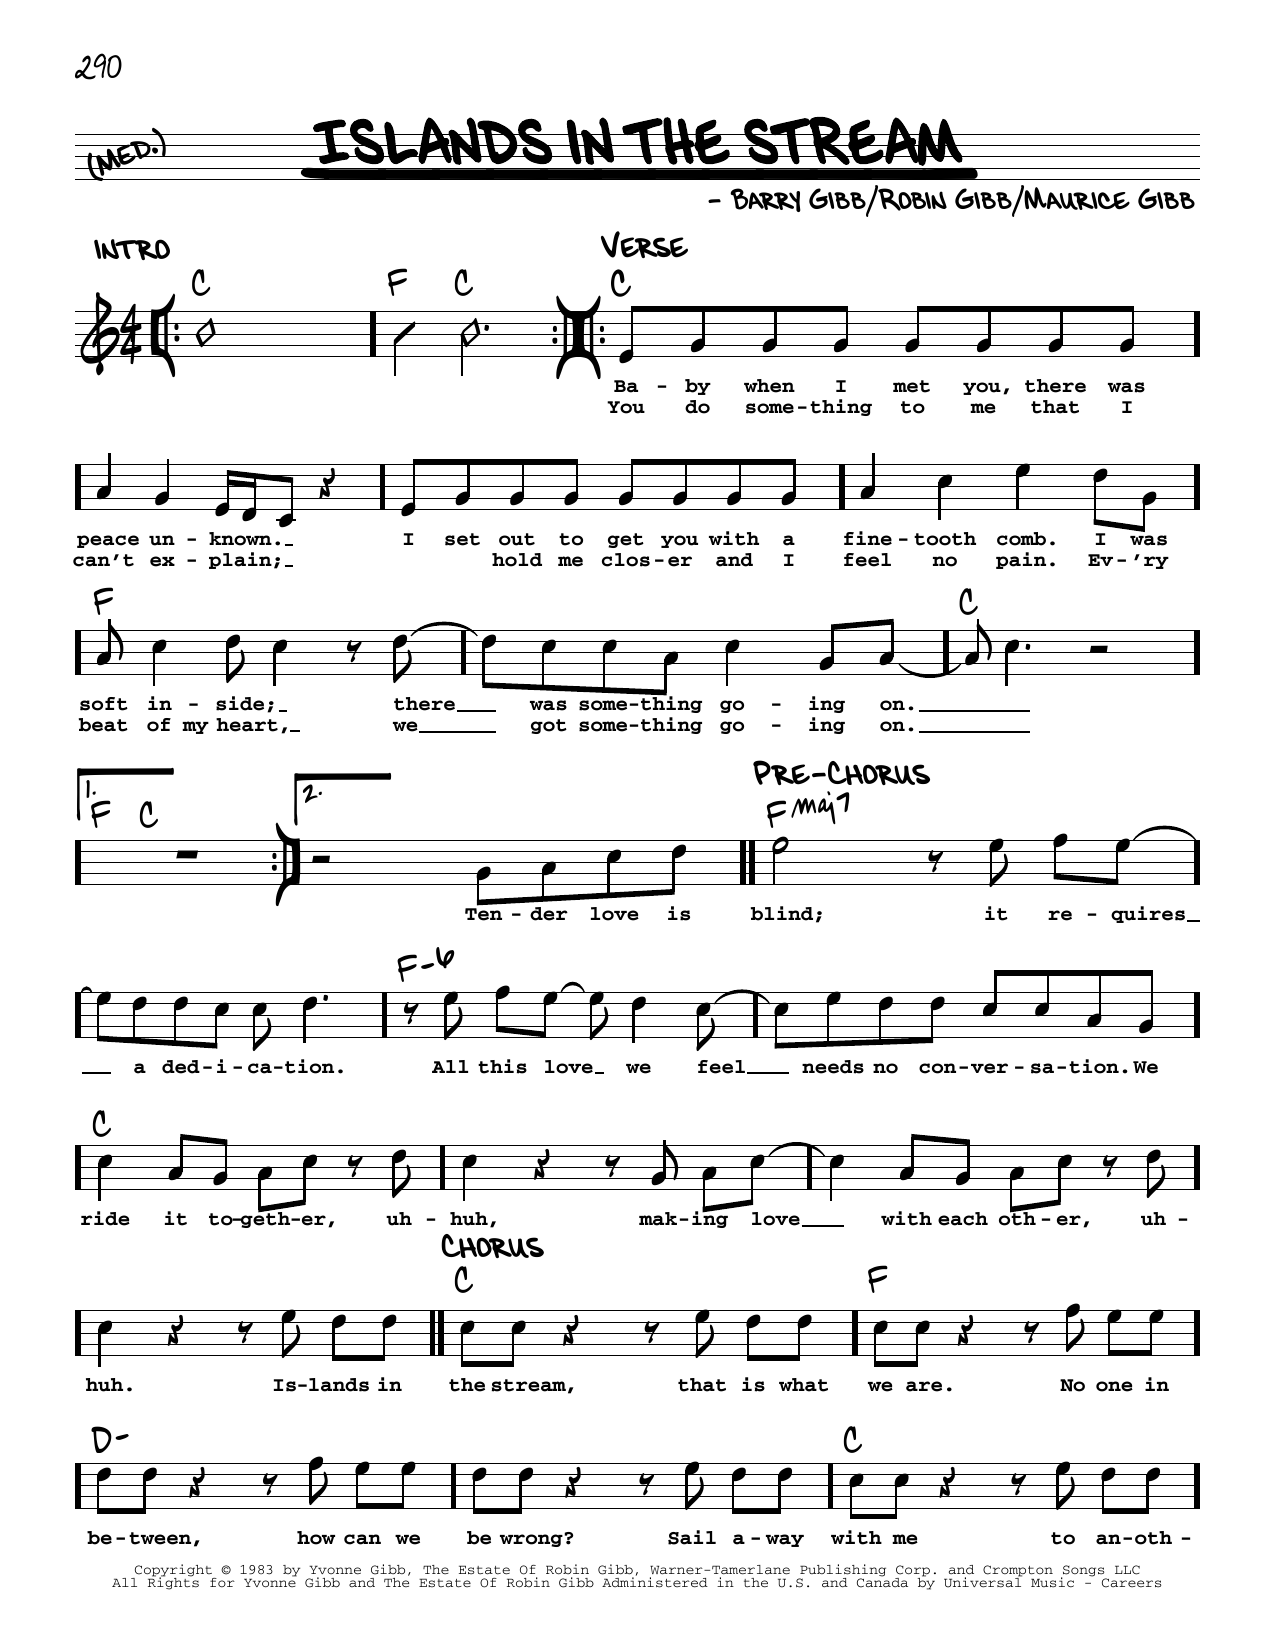 Download Kenny Rogers & Dolly Parton Islands In The Stream Sheet Music